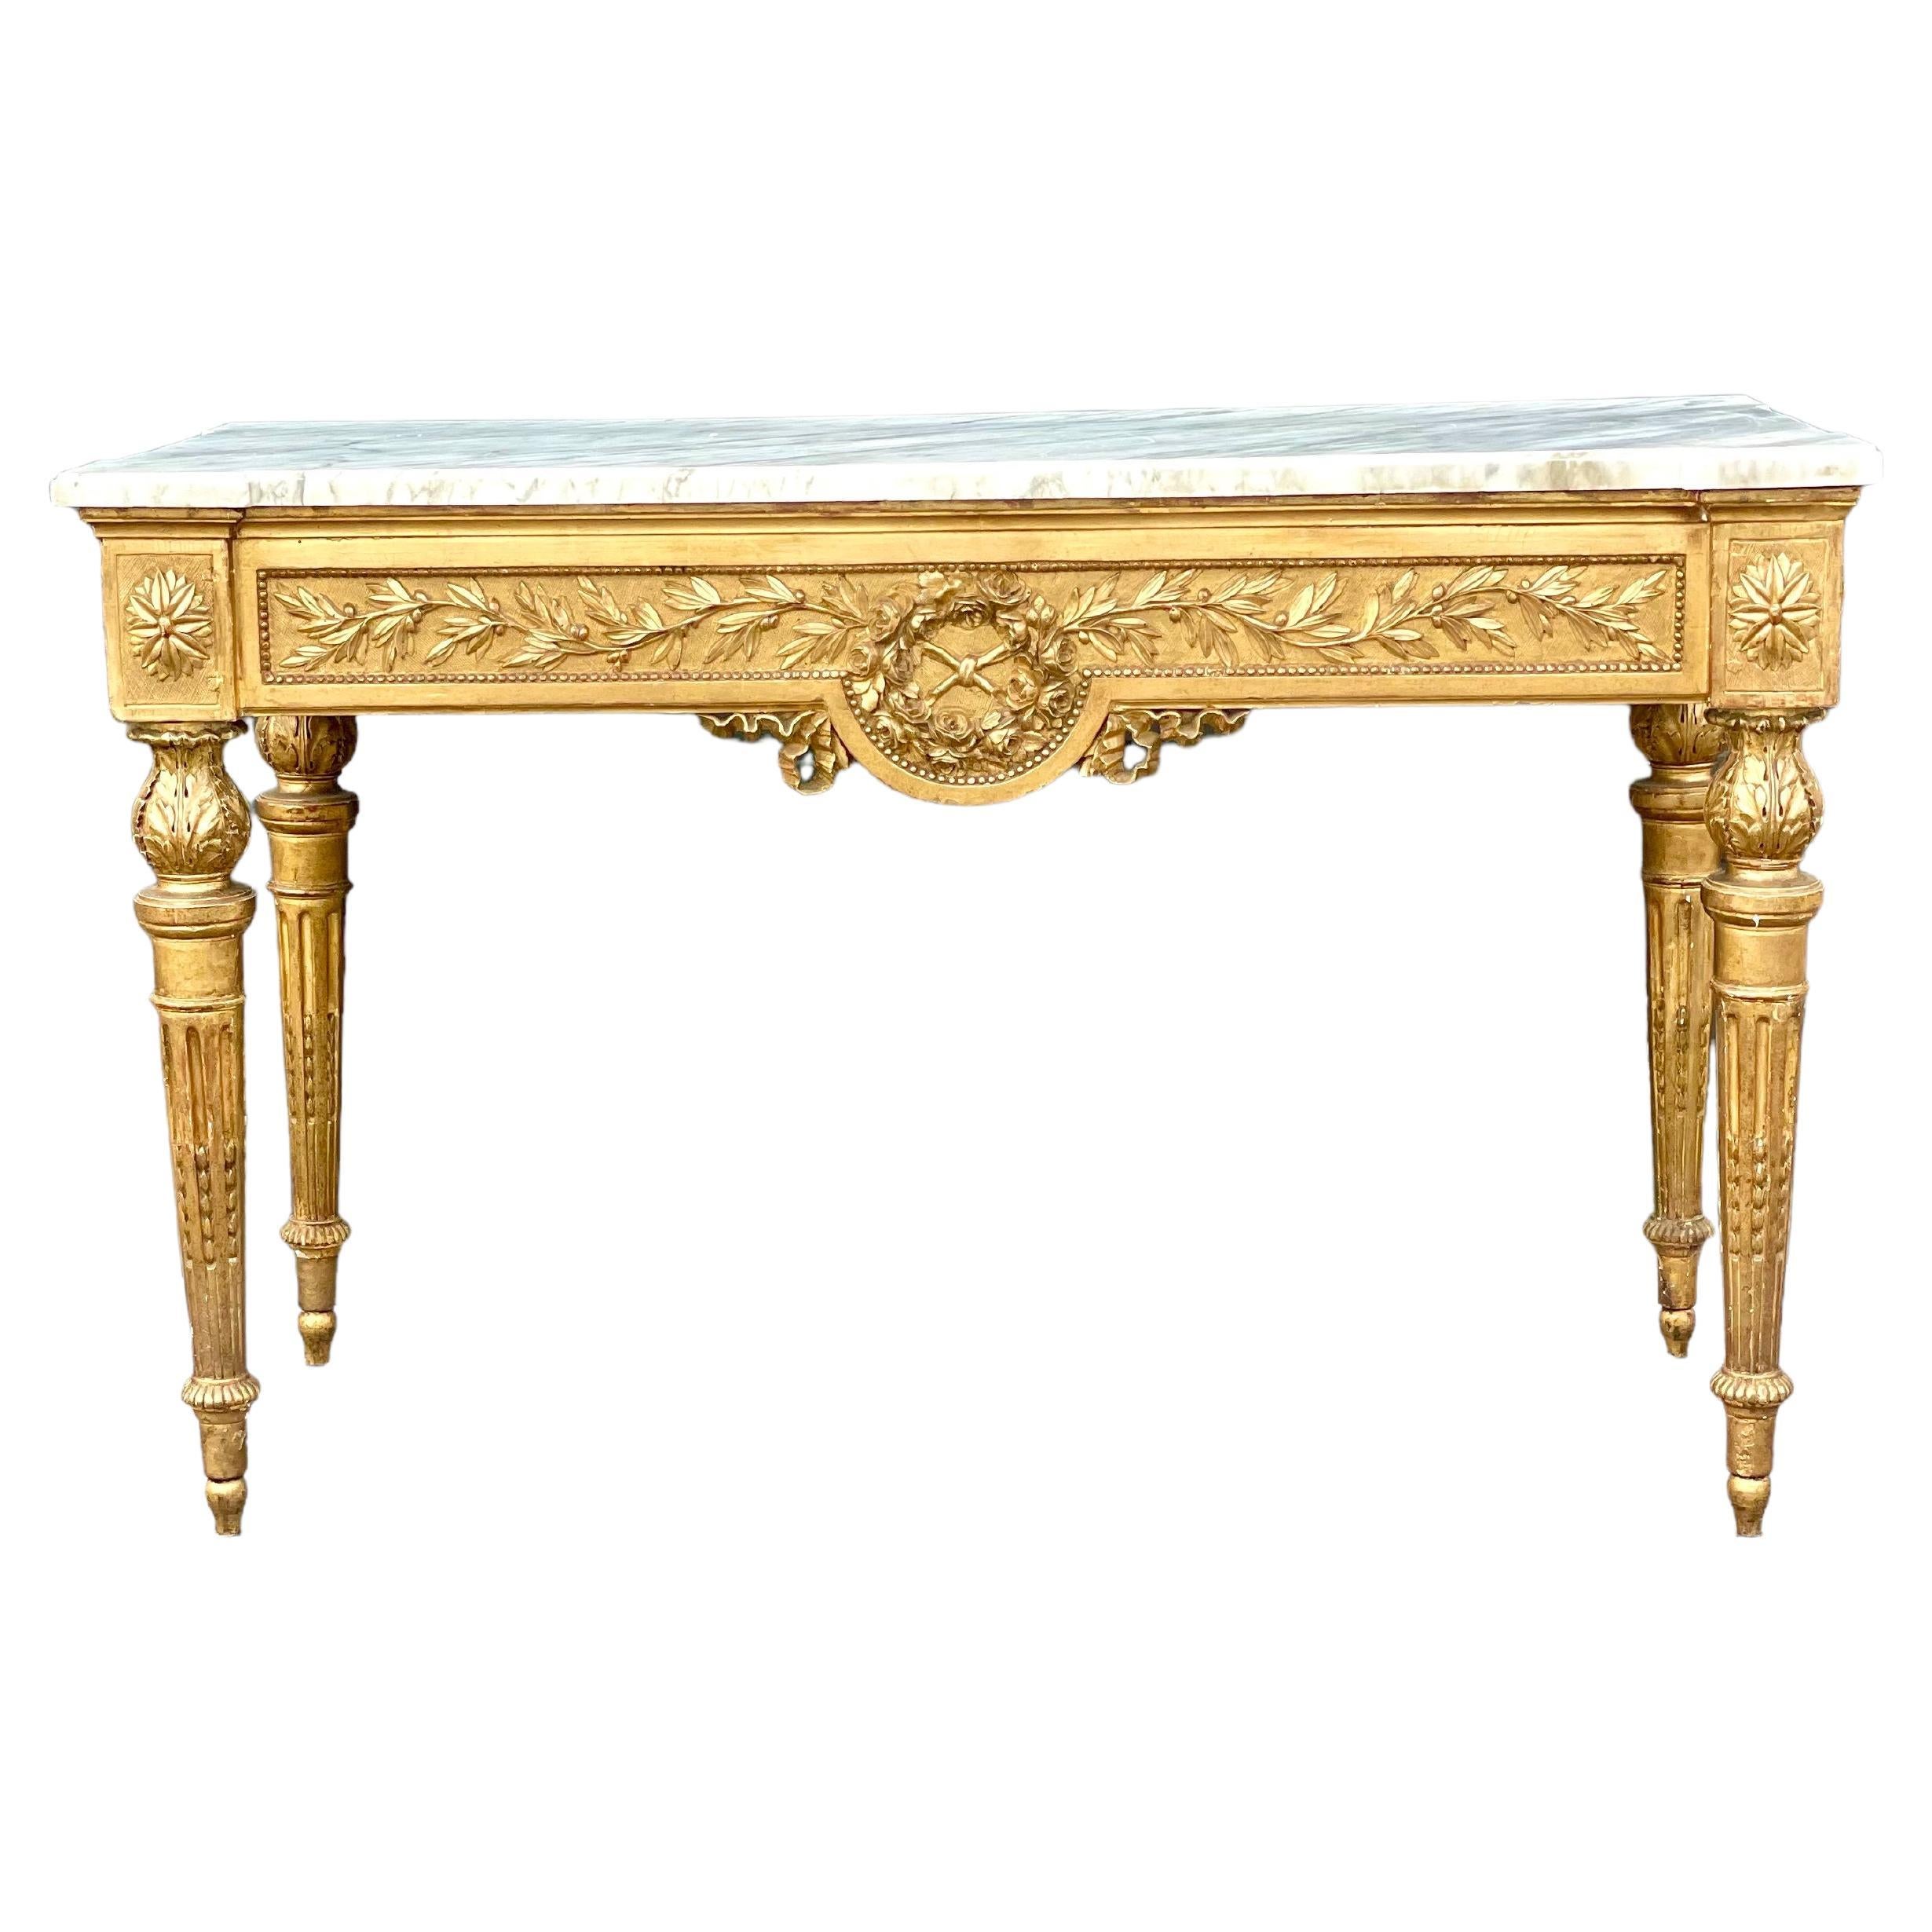 18th Century French Louis XVI Period Giltwood Console Table For Sale